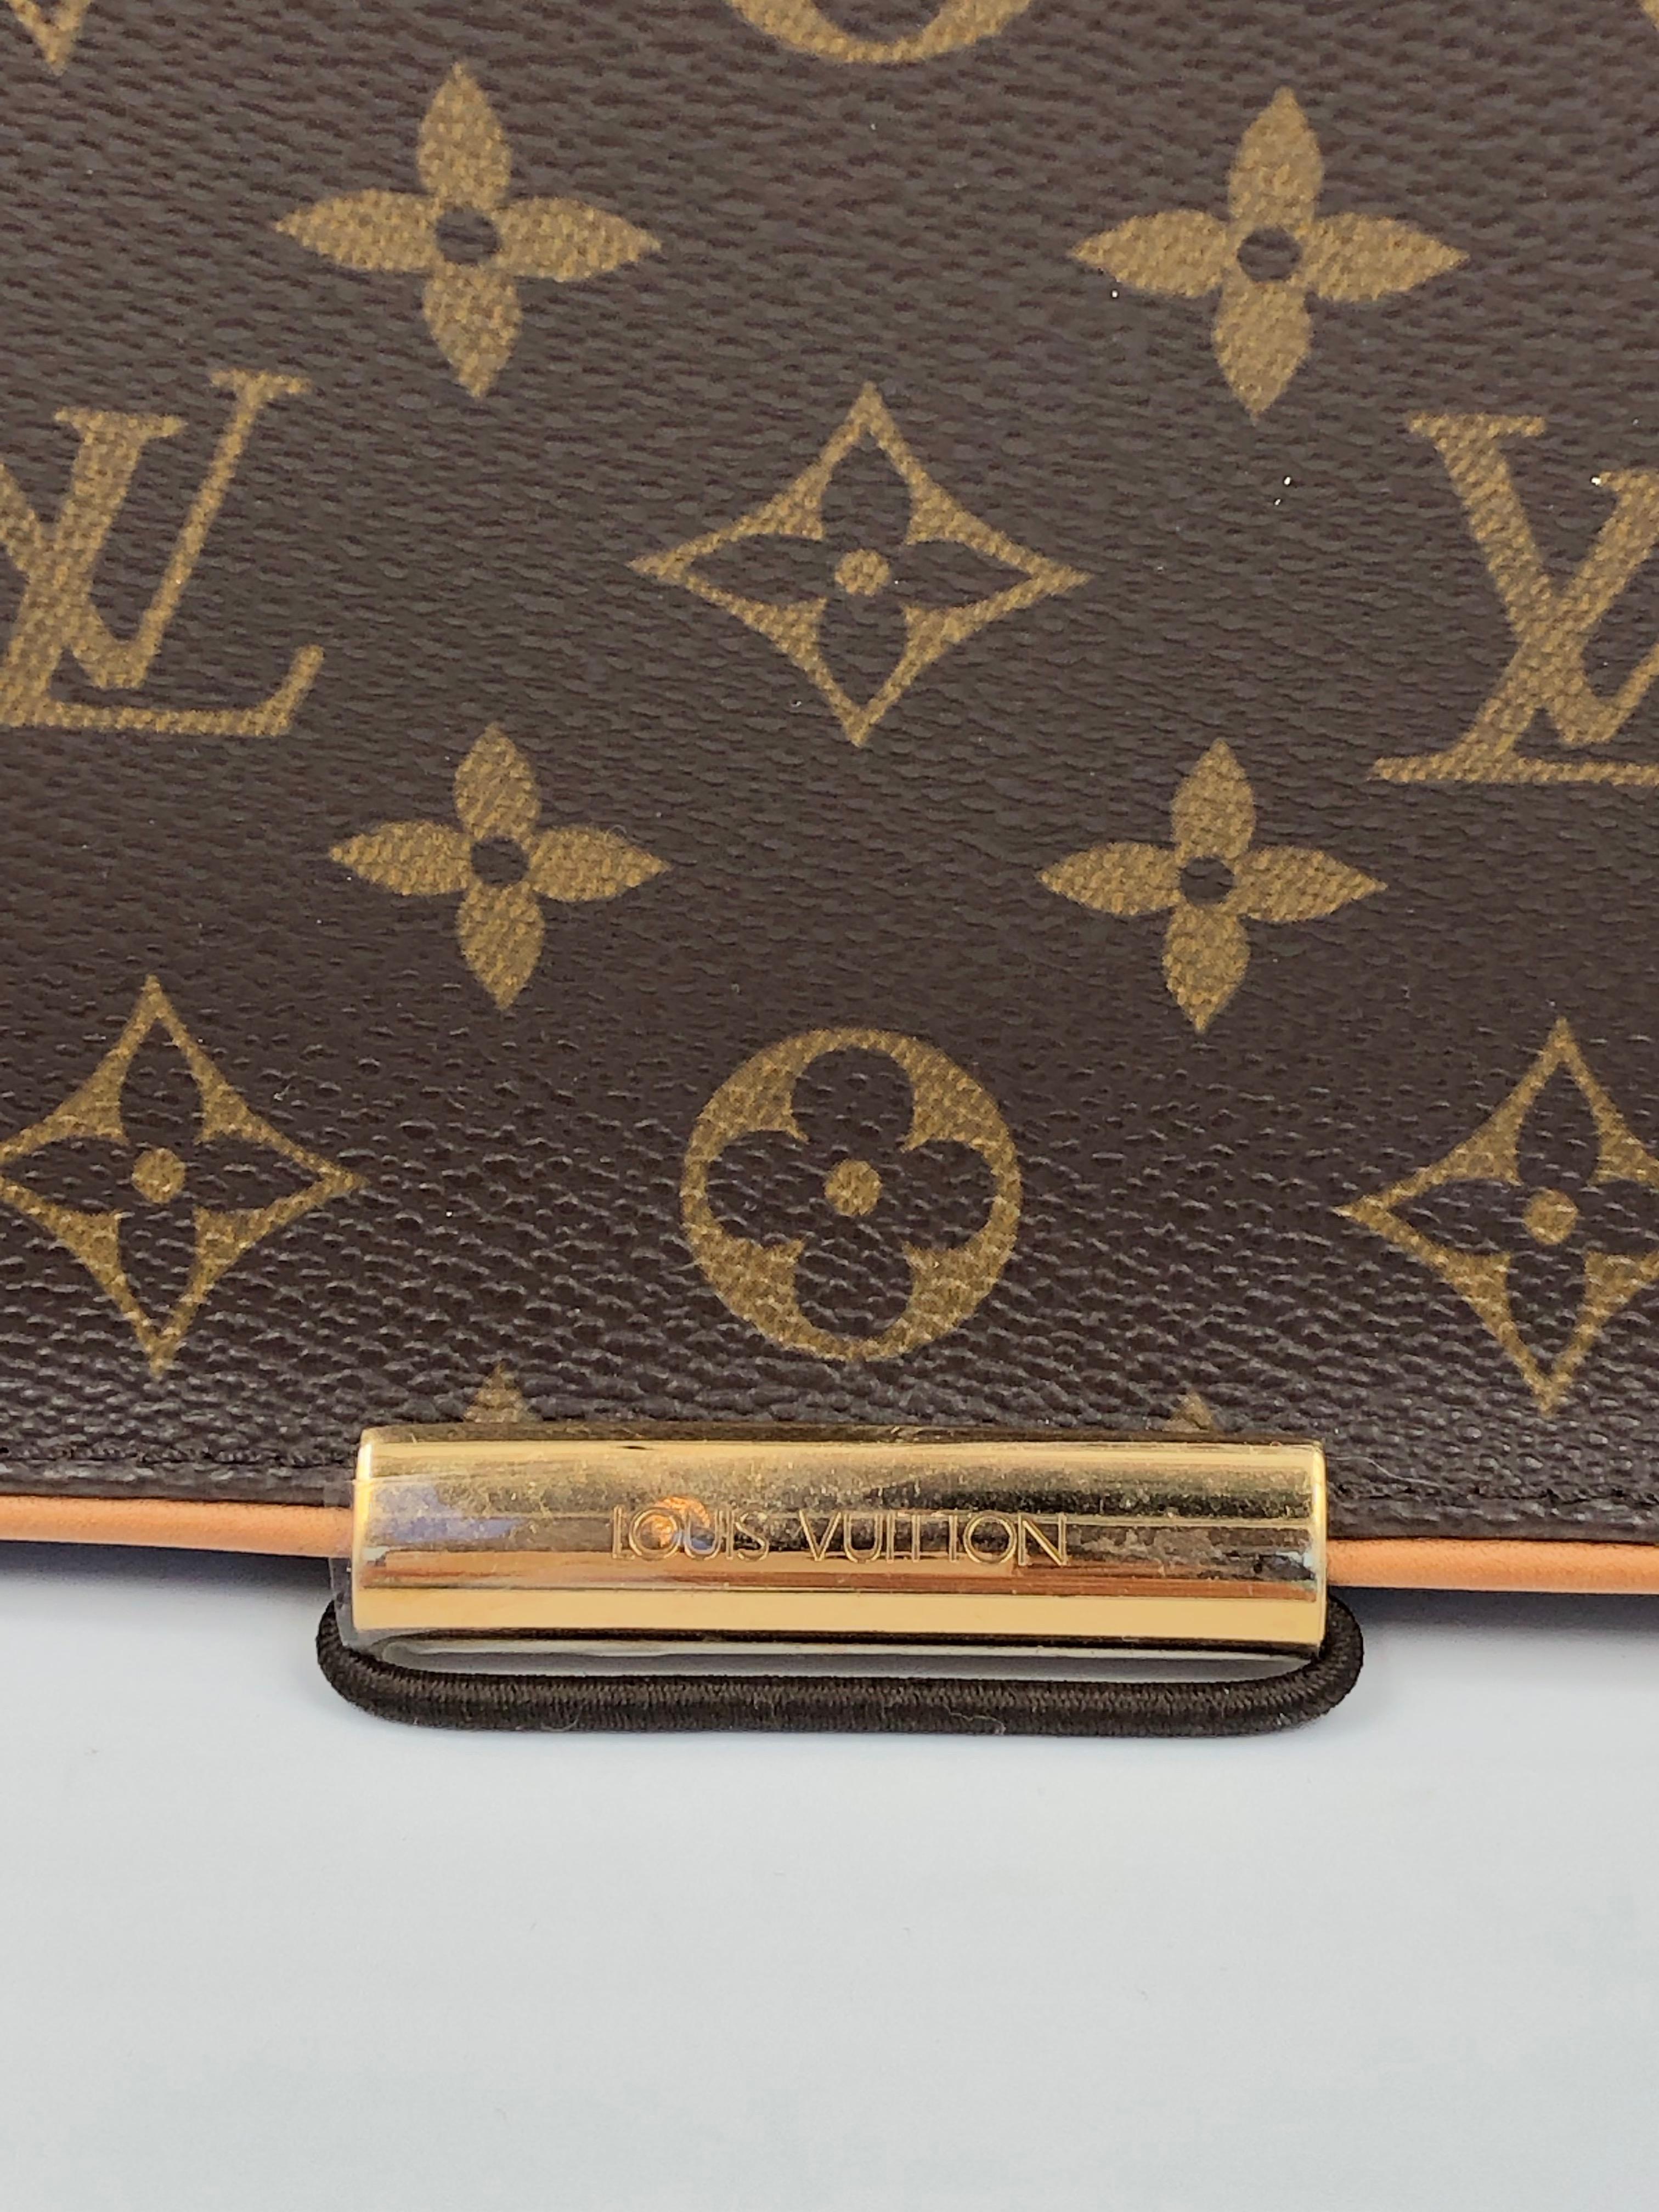 Louis Vuitton Abbesses messenger crossbody bag with brass hardware, tan leather trim and a single adjustable flat shoulder strap. Bag also has a logo adornment at front, dual slit pockets under front flap and a single slit pocket at back. Brown